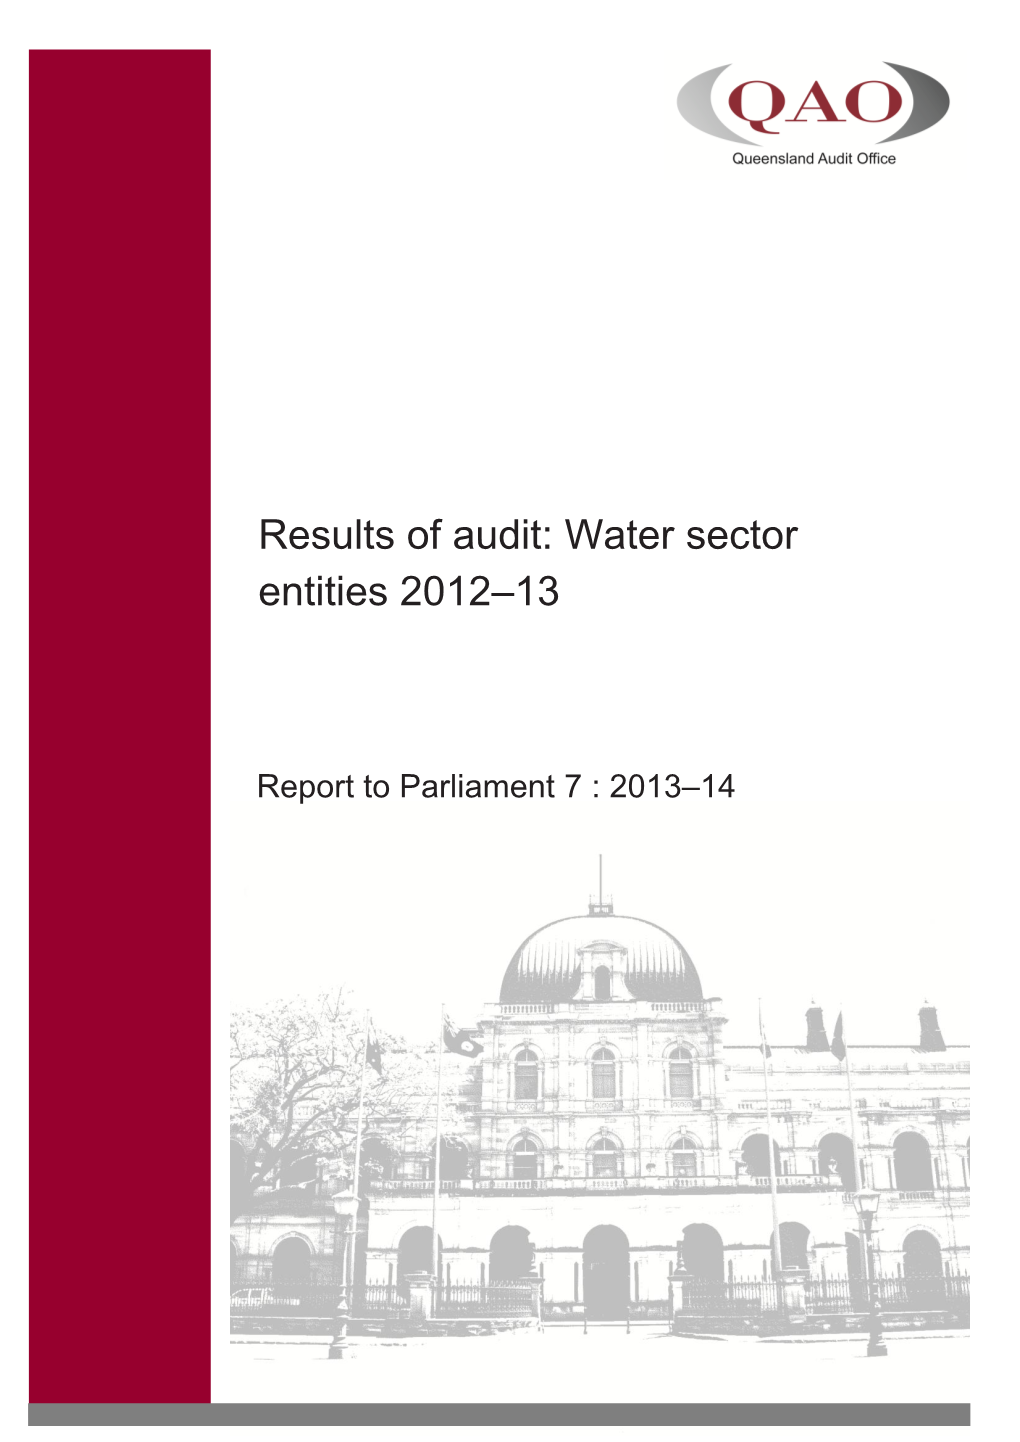 Results of Audit: Water Sector Entities 2012-13 (Report 7 : 2013-14